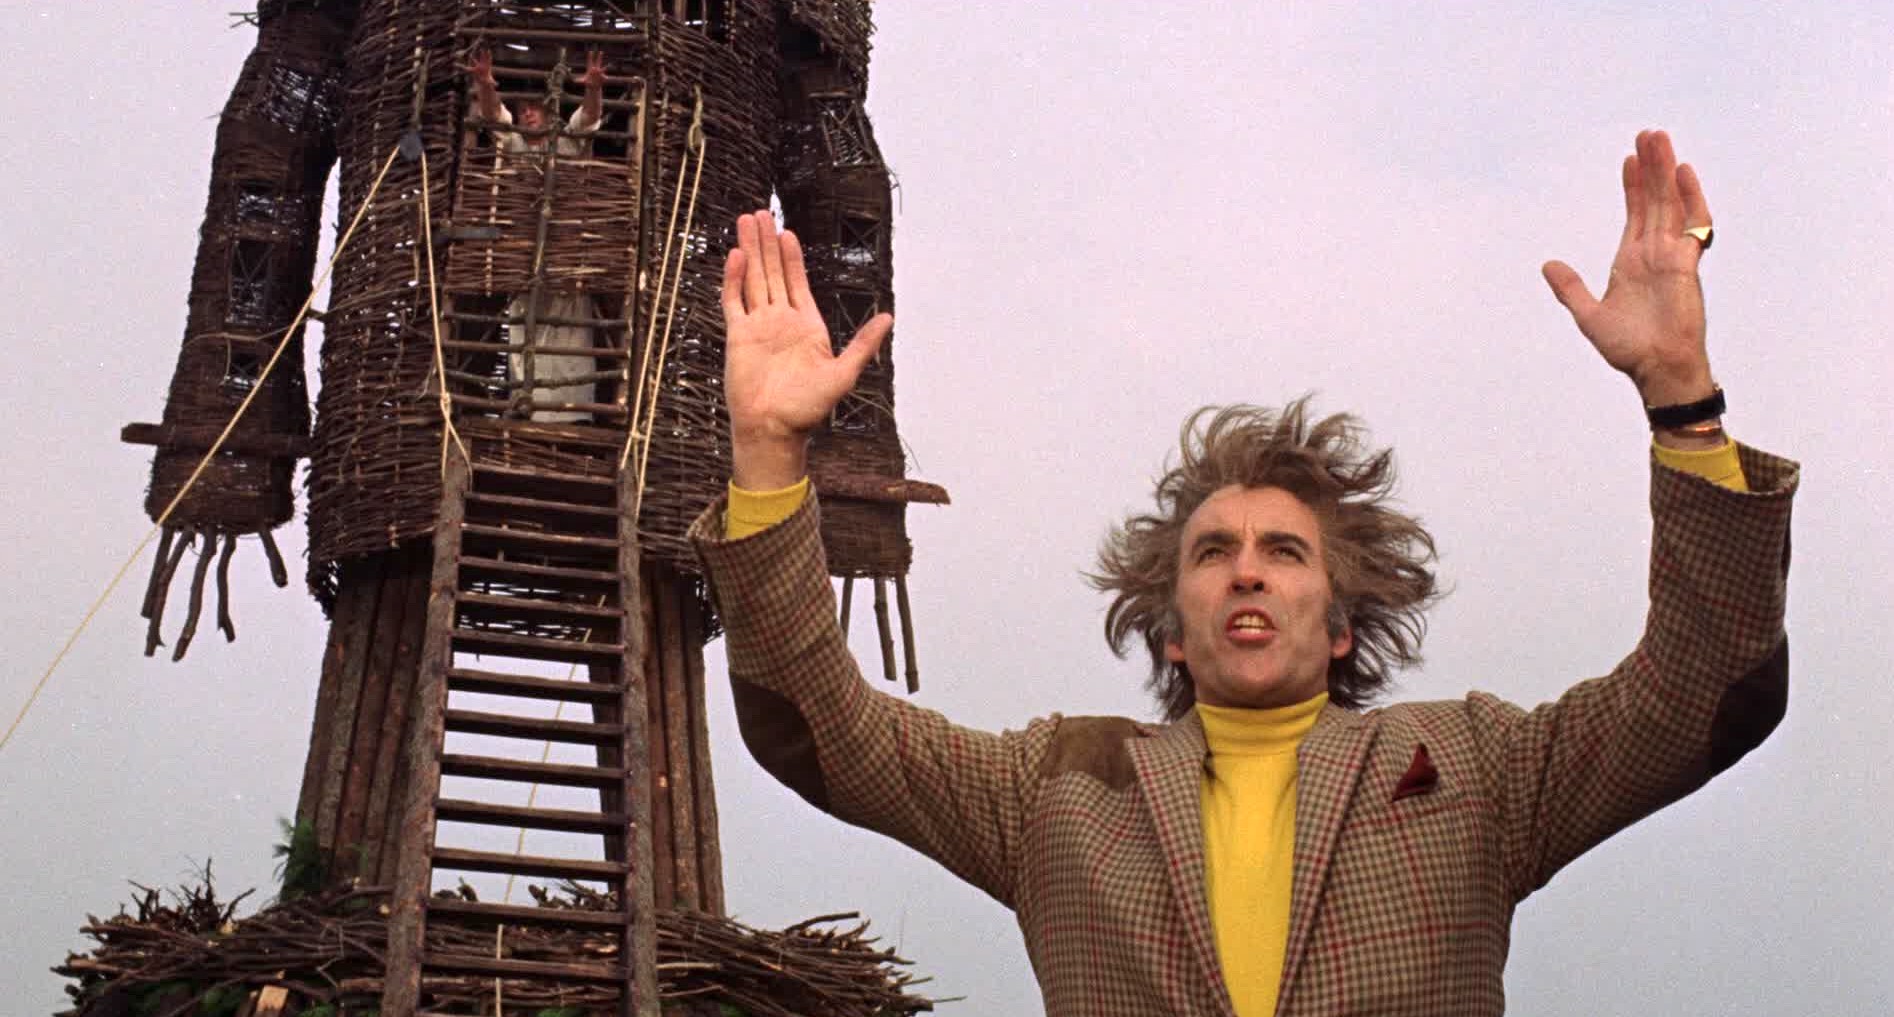 Lord Summerisle holds two hands in the air as he preaches to the crowd and prepares light the wicker man and Sgt. Neil Howie aflame